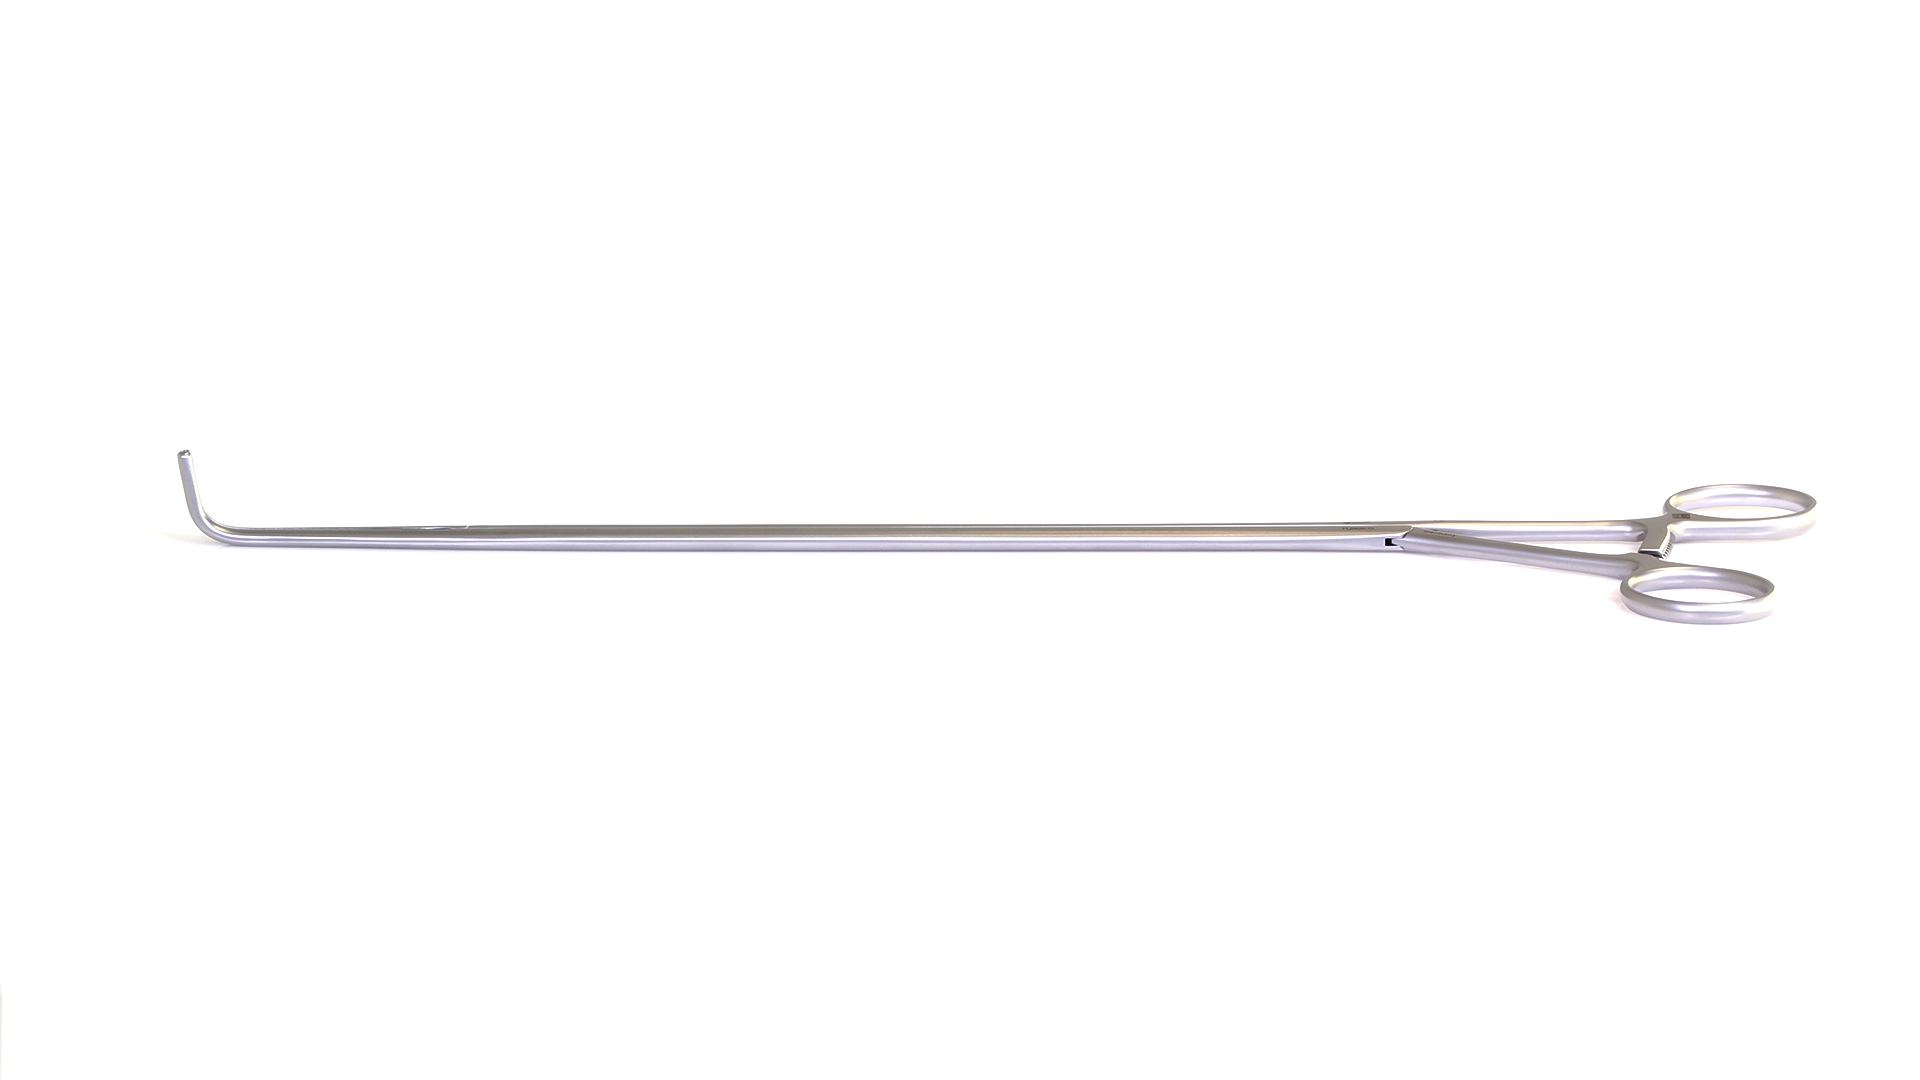 VATS Right Angle Dissector – DeBakey/Cooley serrated jaws